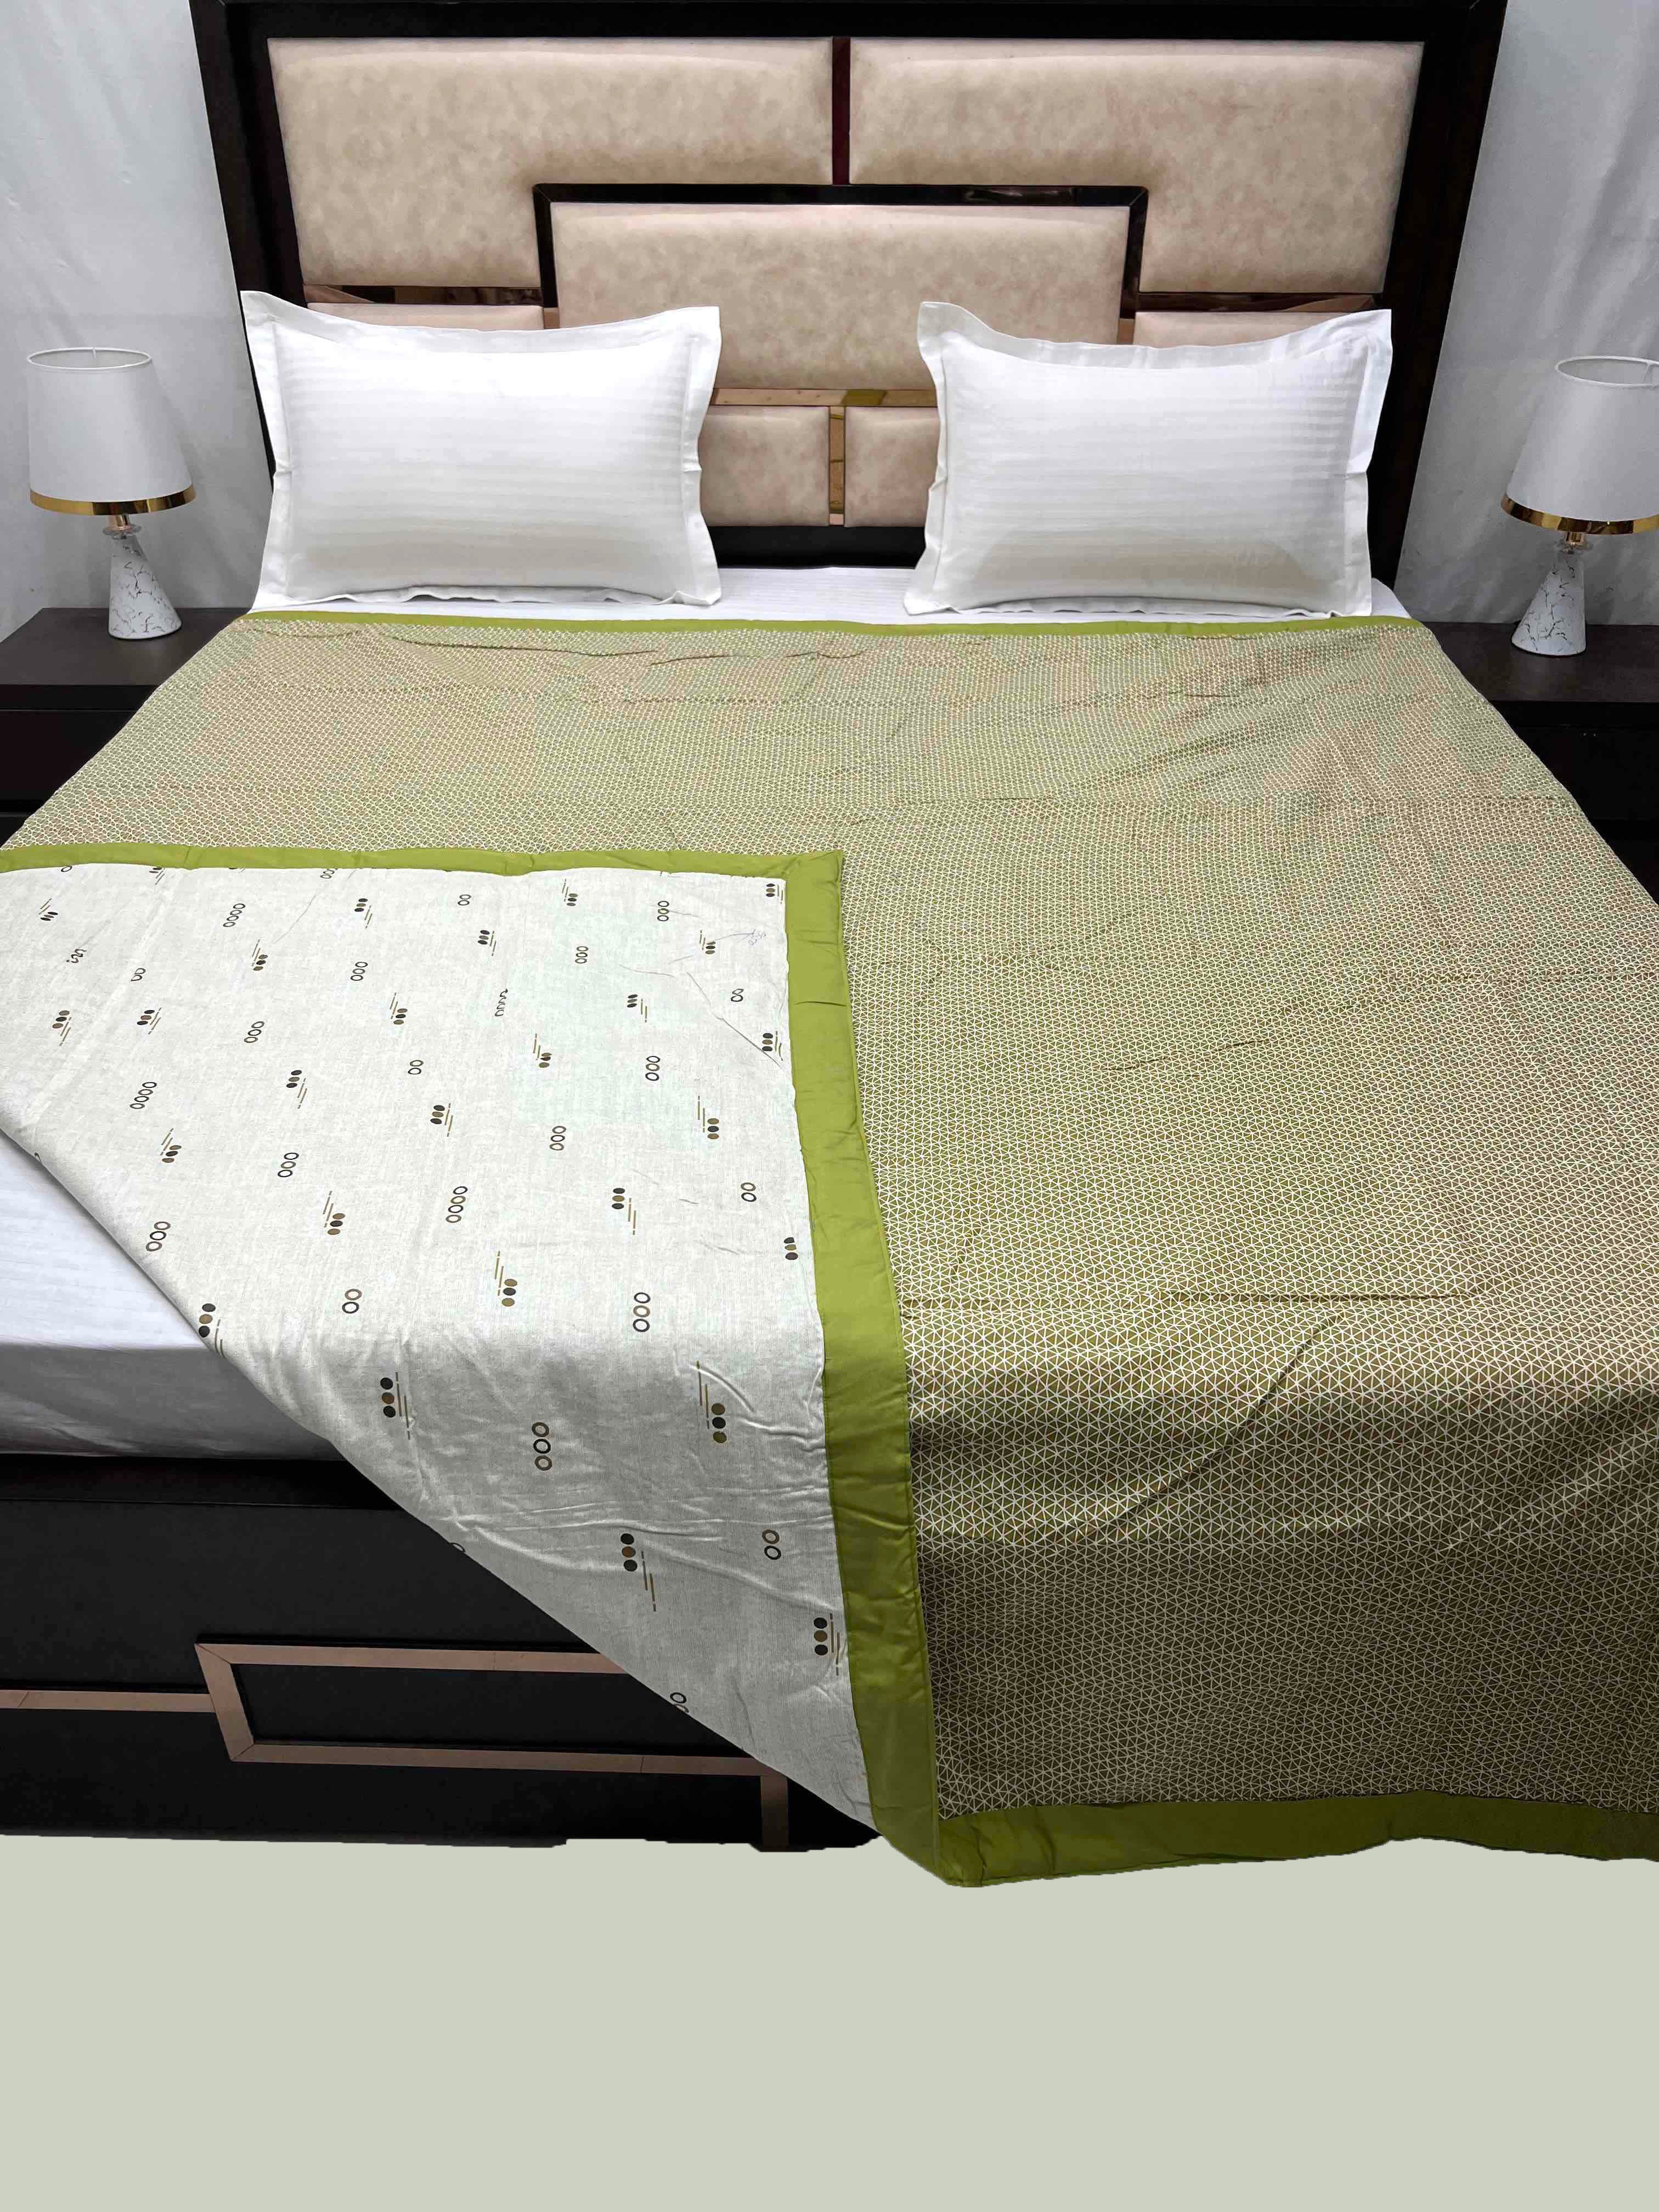 Silken Collection Pure Decor Pure Cotton King Size 300 TC Reversible Double Bed dohar / Blanket / AC Comforter with Warm Cotton Sheet Layer Inside (221X246)